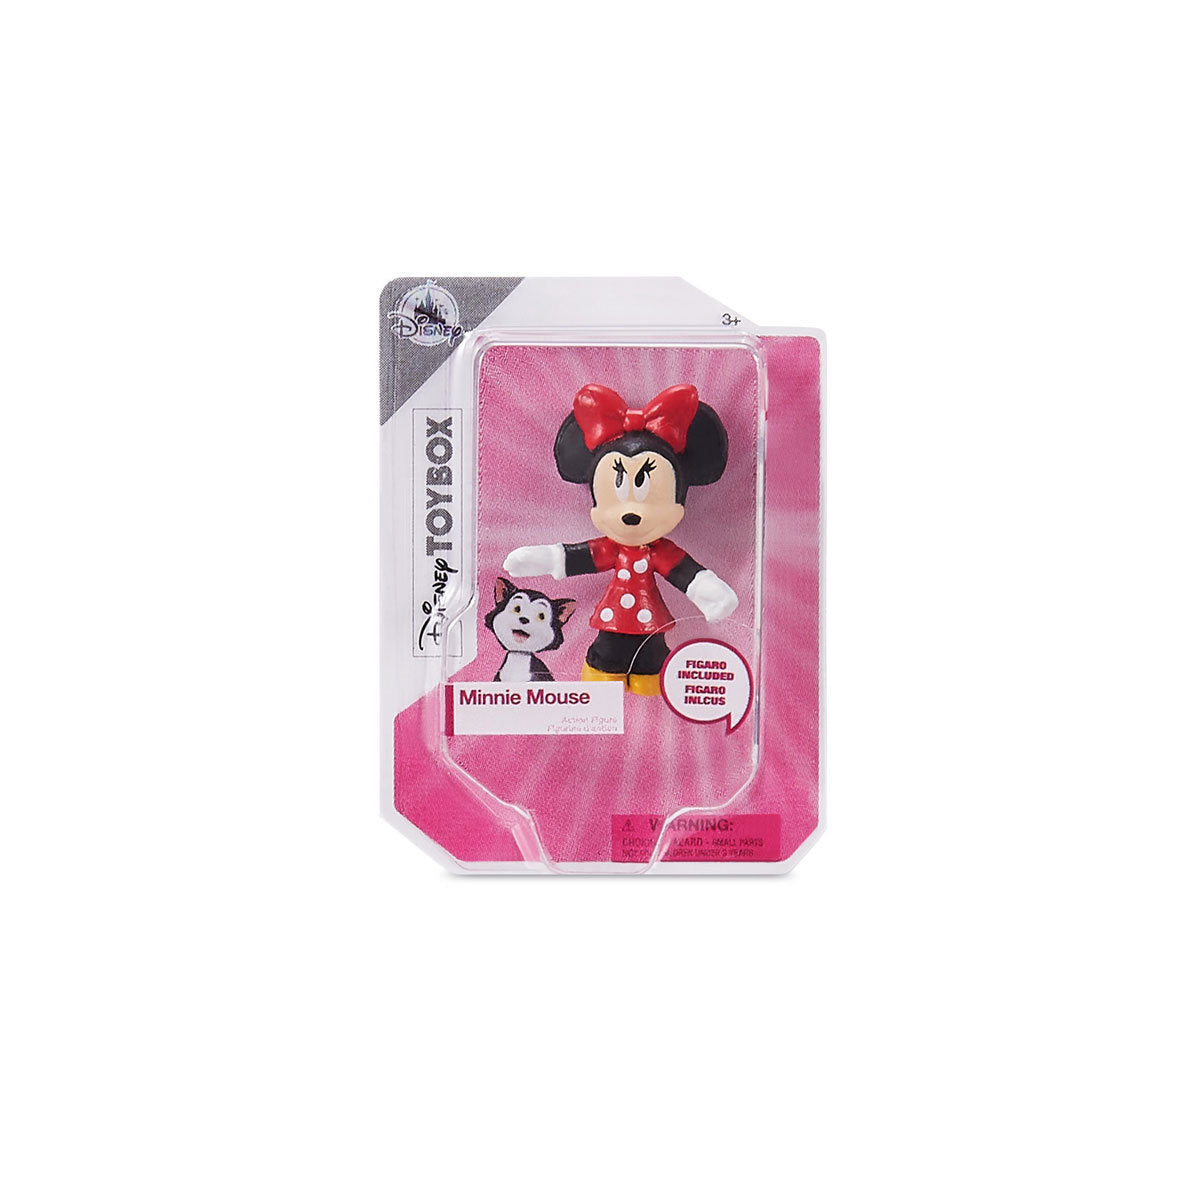 5 Surprise Series 1 Disney Store Edition Mystery Capsule